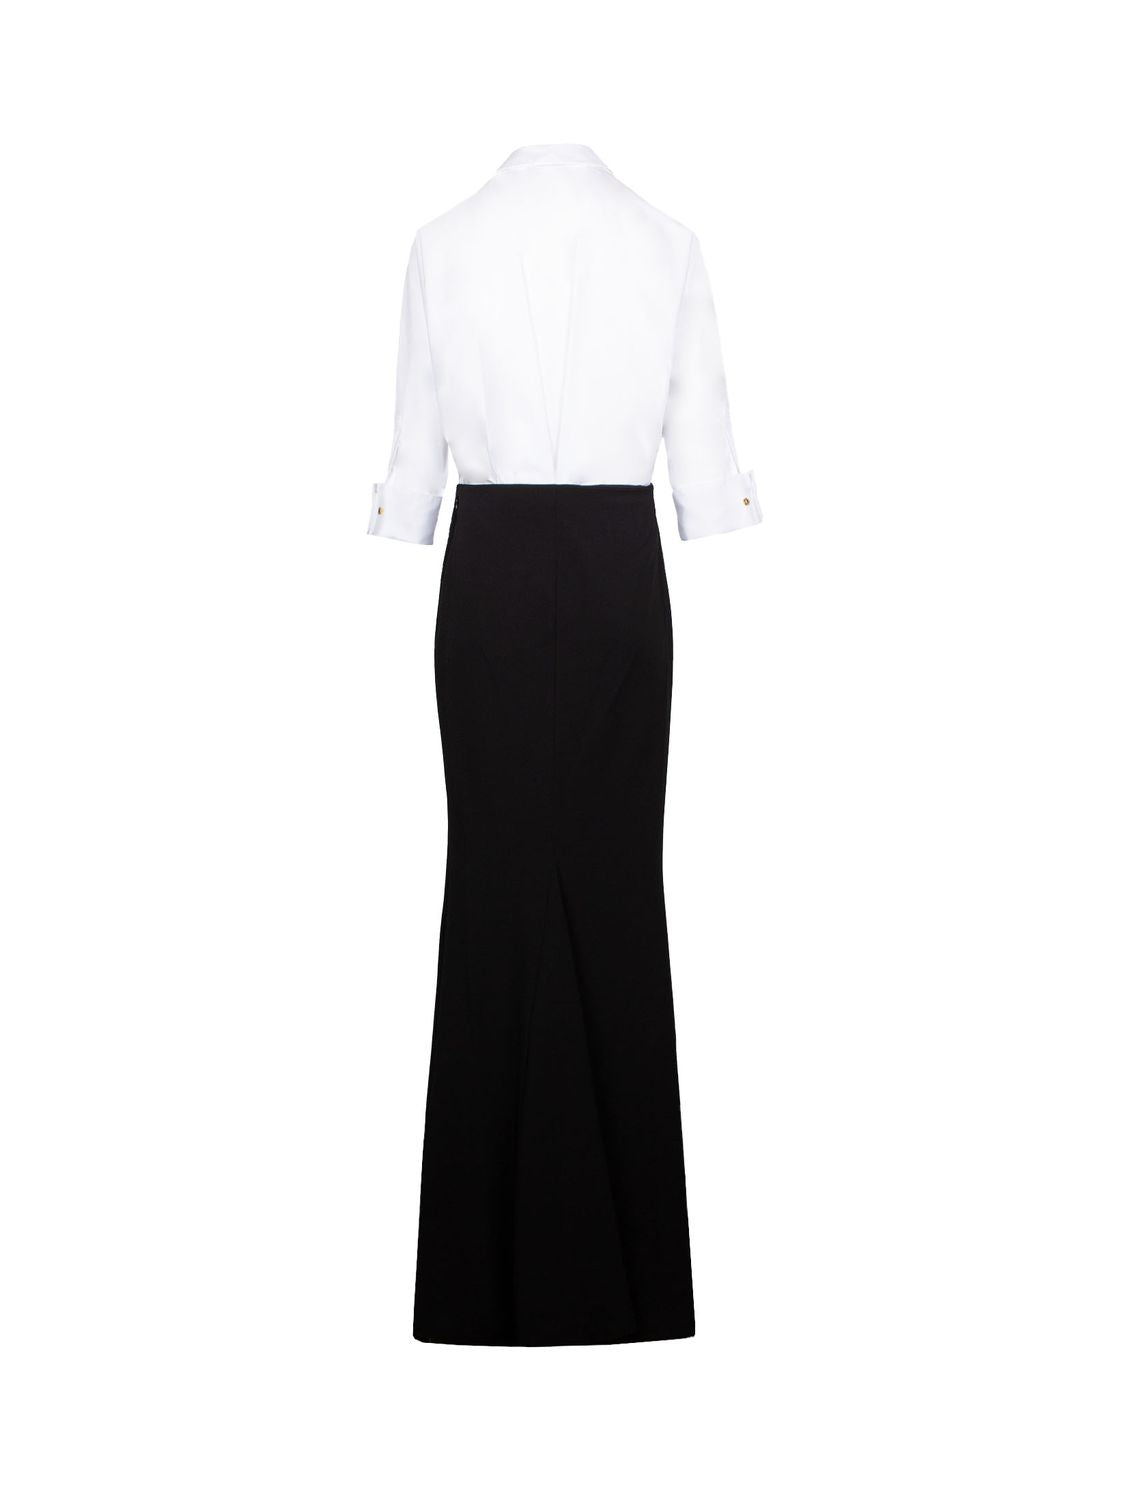 ELISABETTA FRANCHI Panelled Maxi Mermaid Dress in Black and White